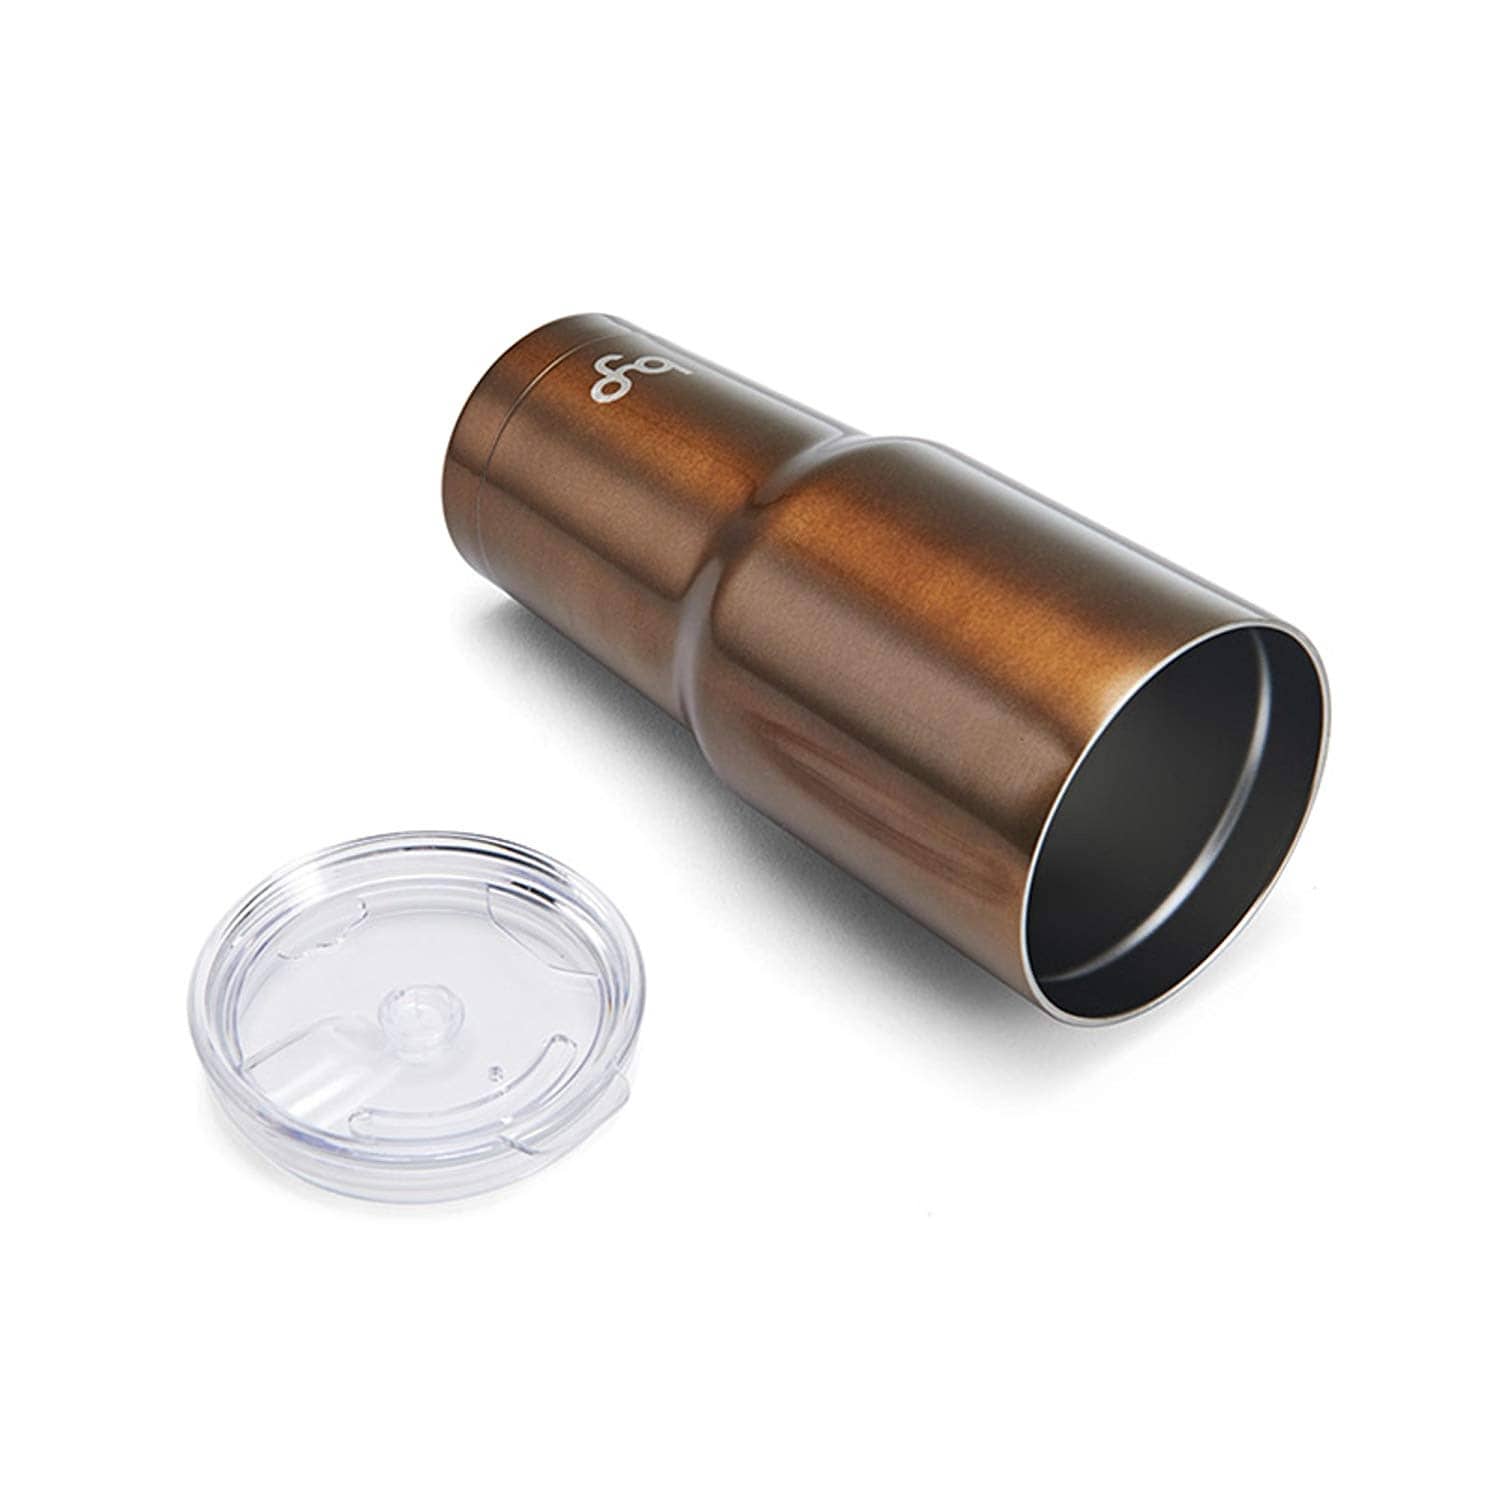 https://ak1.ostkcdn.com/images/products/is/images/direct/cbd6f42be465b7aa103d094766bd2a465544019b/BYO-Double-Wall-Stainless-Steel-Vacuum-Insulated-Tumbler-With-Spill-Proof-Durable-Tritan-Lid-For-Hot-%26-Cold-Drinks-30-Oz-Bronze.jpg